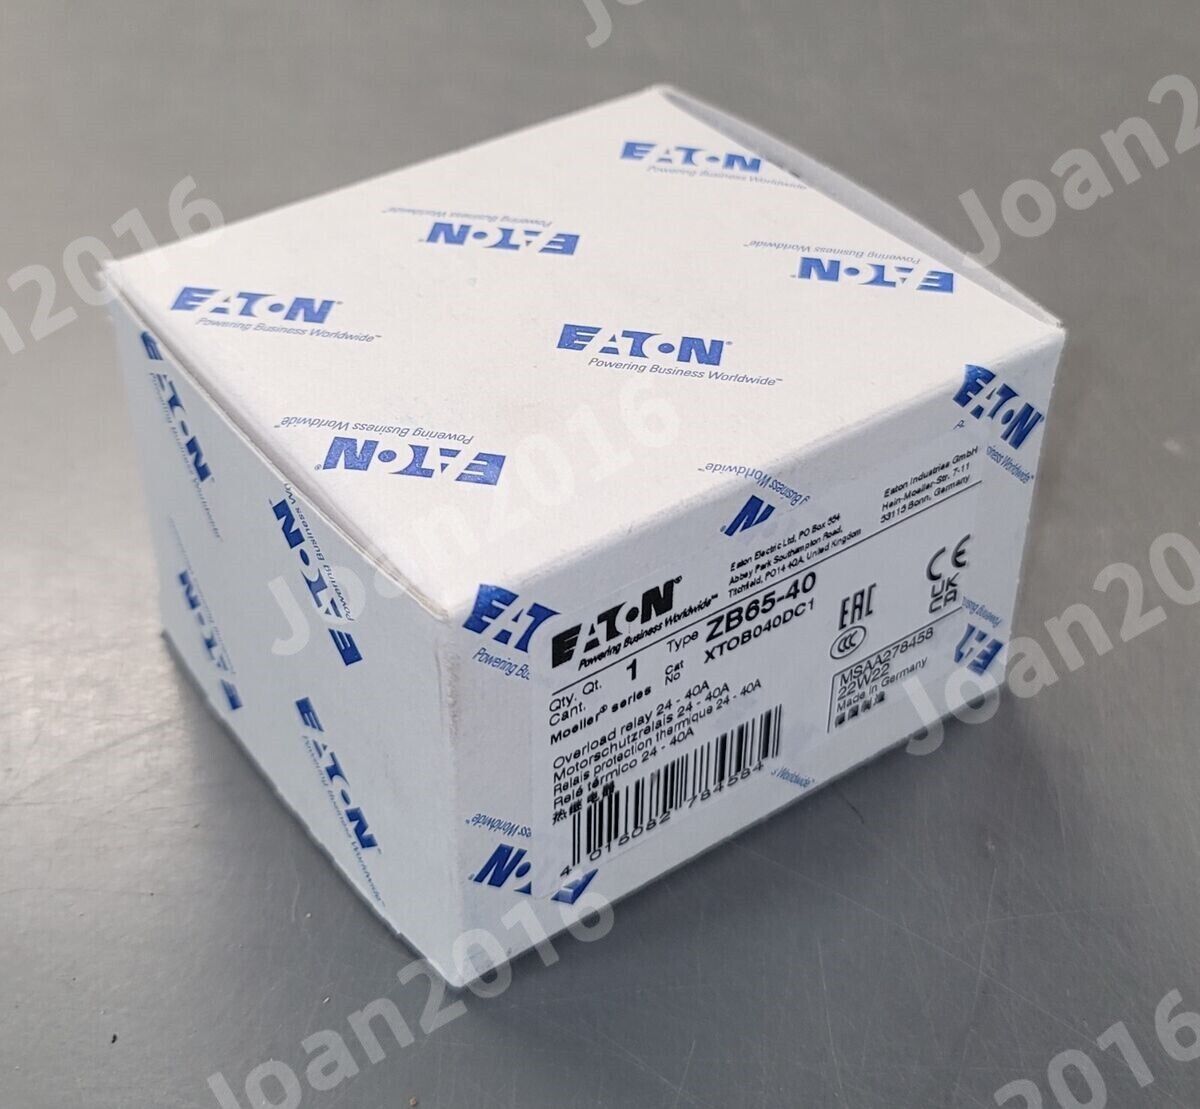 New EATON MOELLER ZB65-40 Overload Relay 24-40A